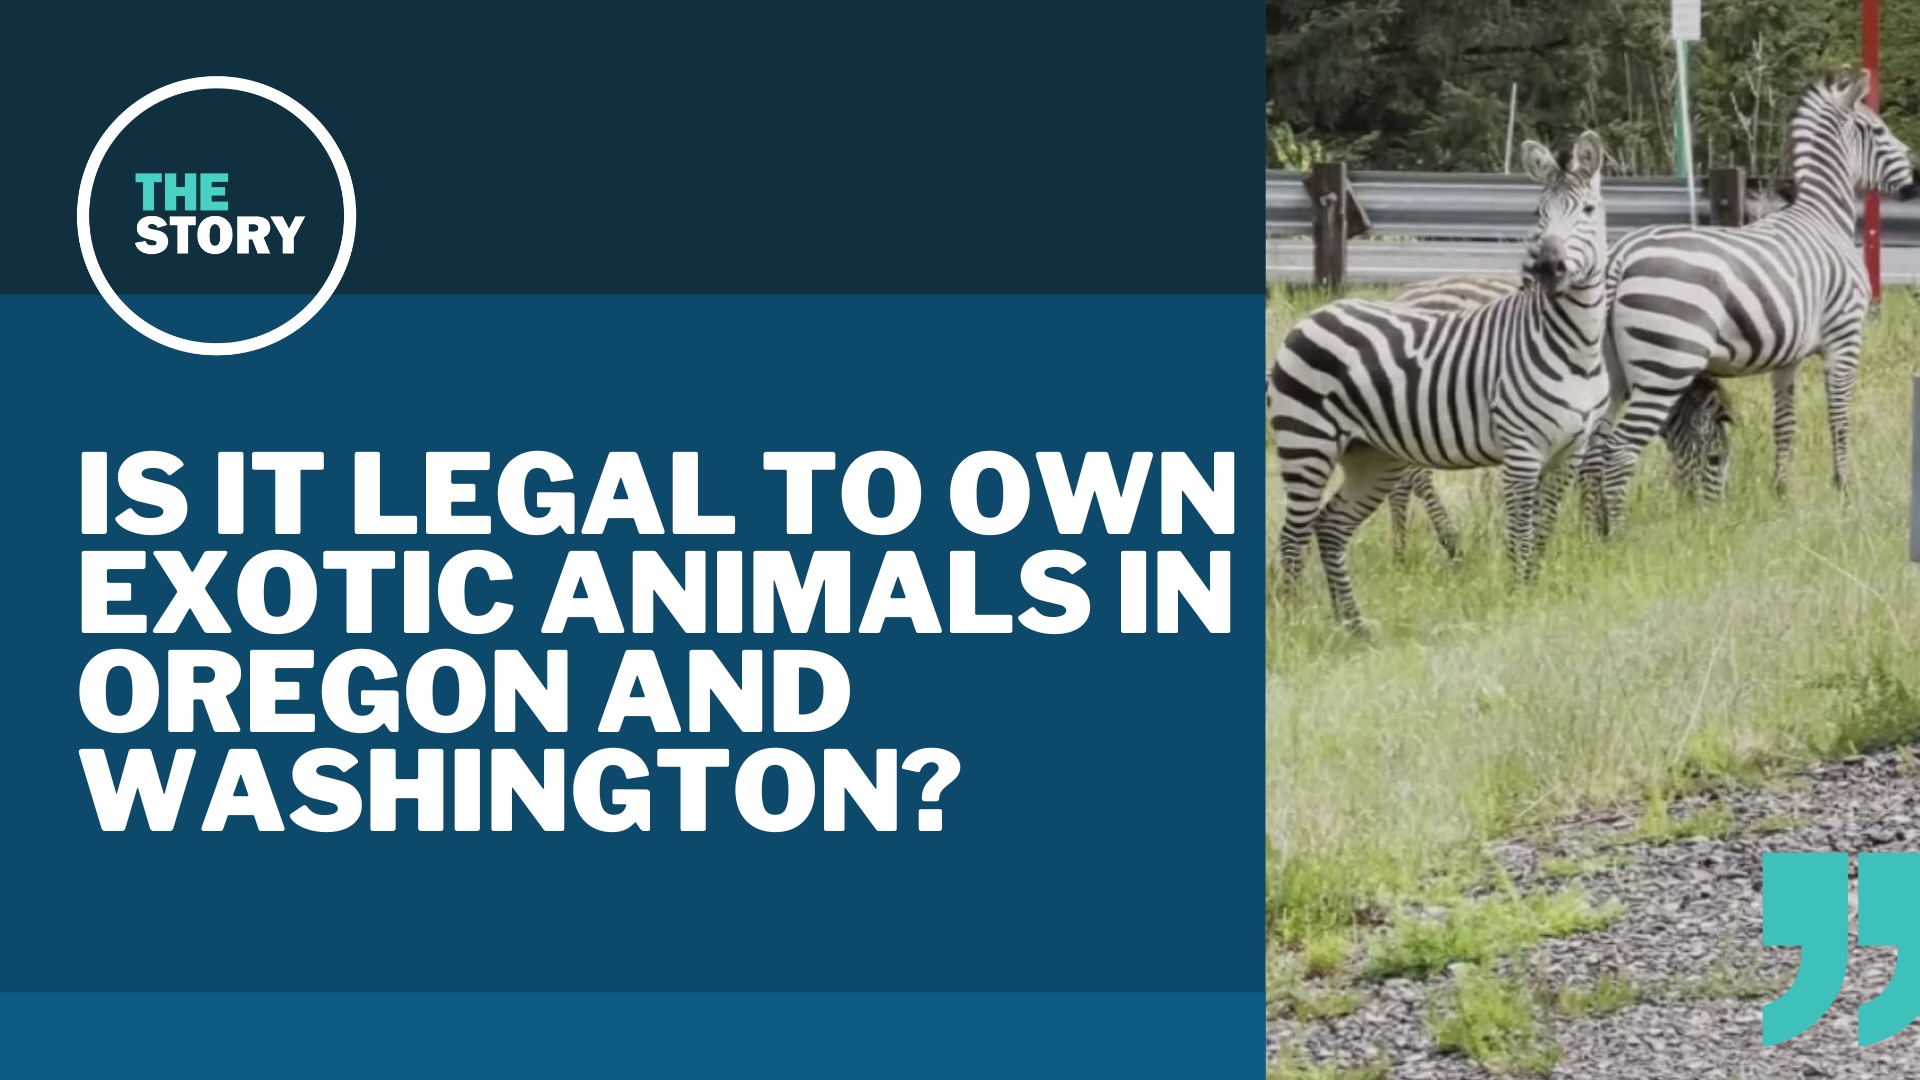 It's perfectly legal to own zebras in both Washington and Oregon, as it turns out. Really, only dangerous animals are highly regulated by the state.